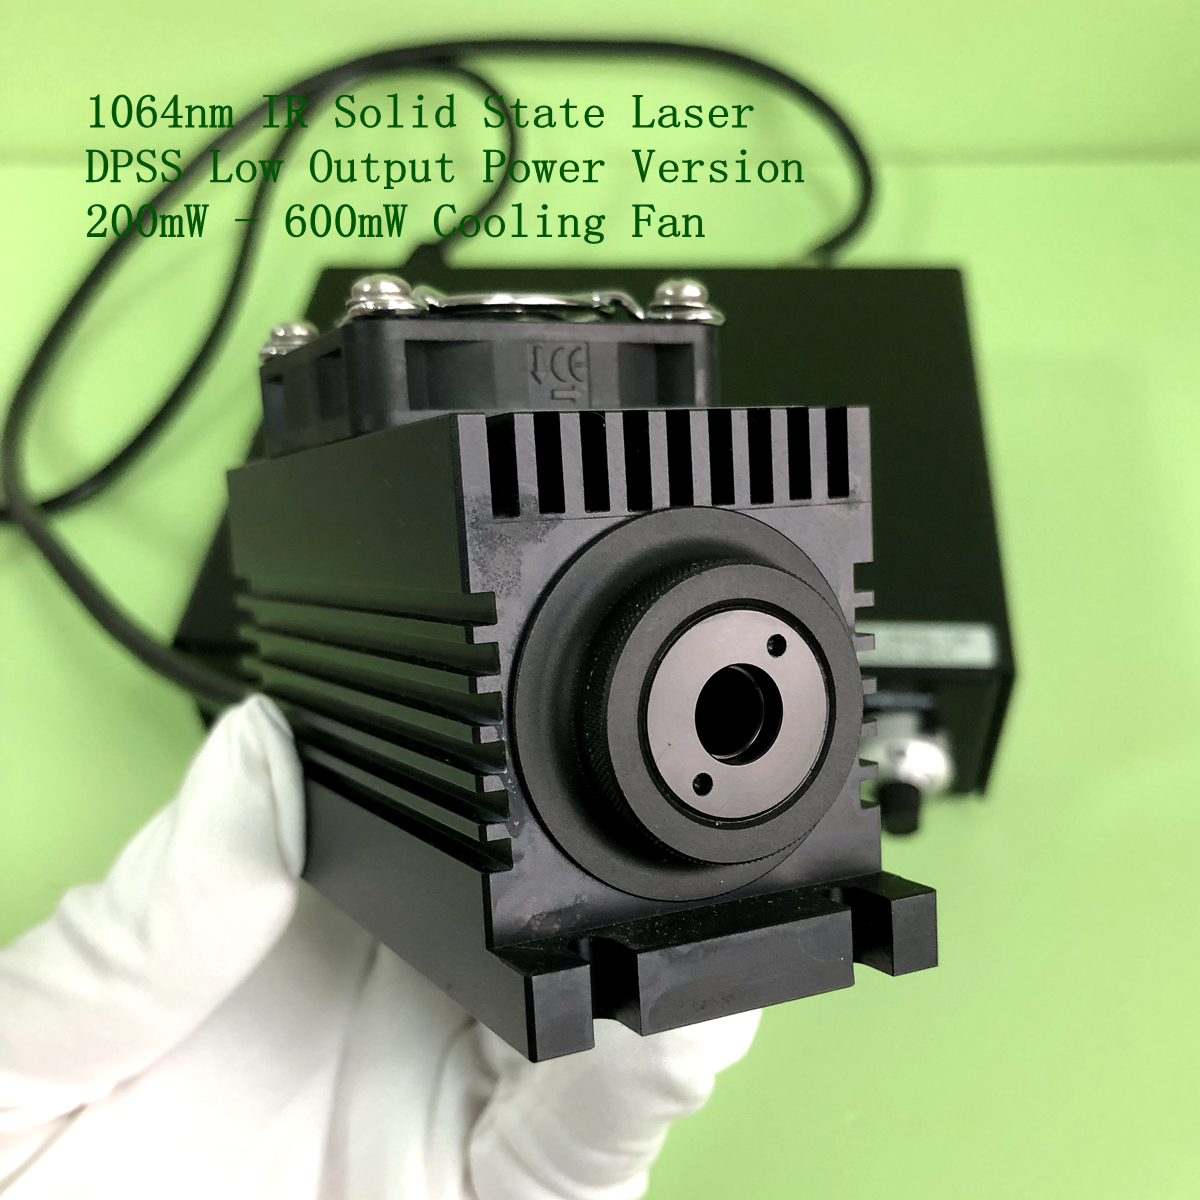 1064nm solid state laser